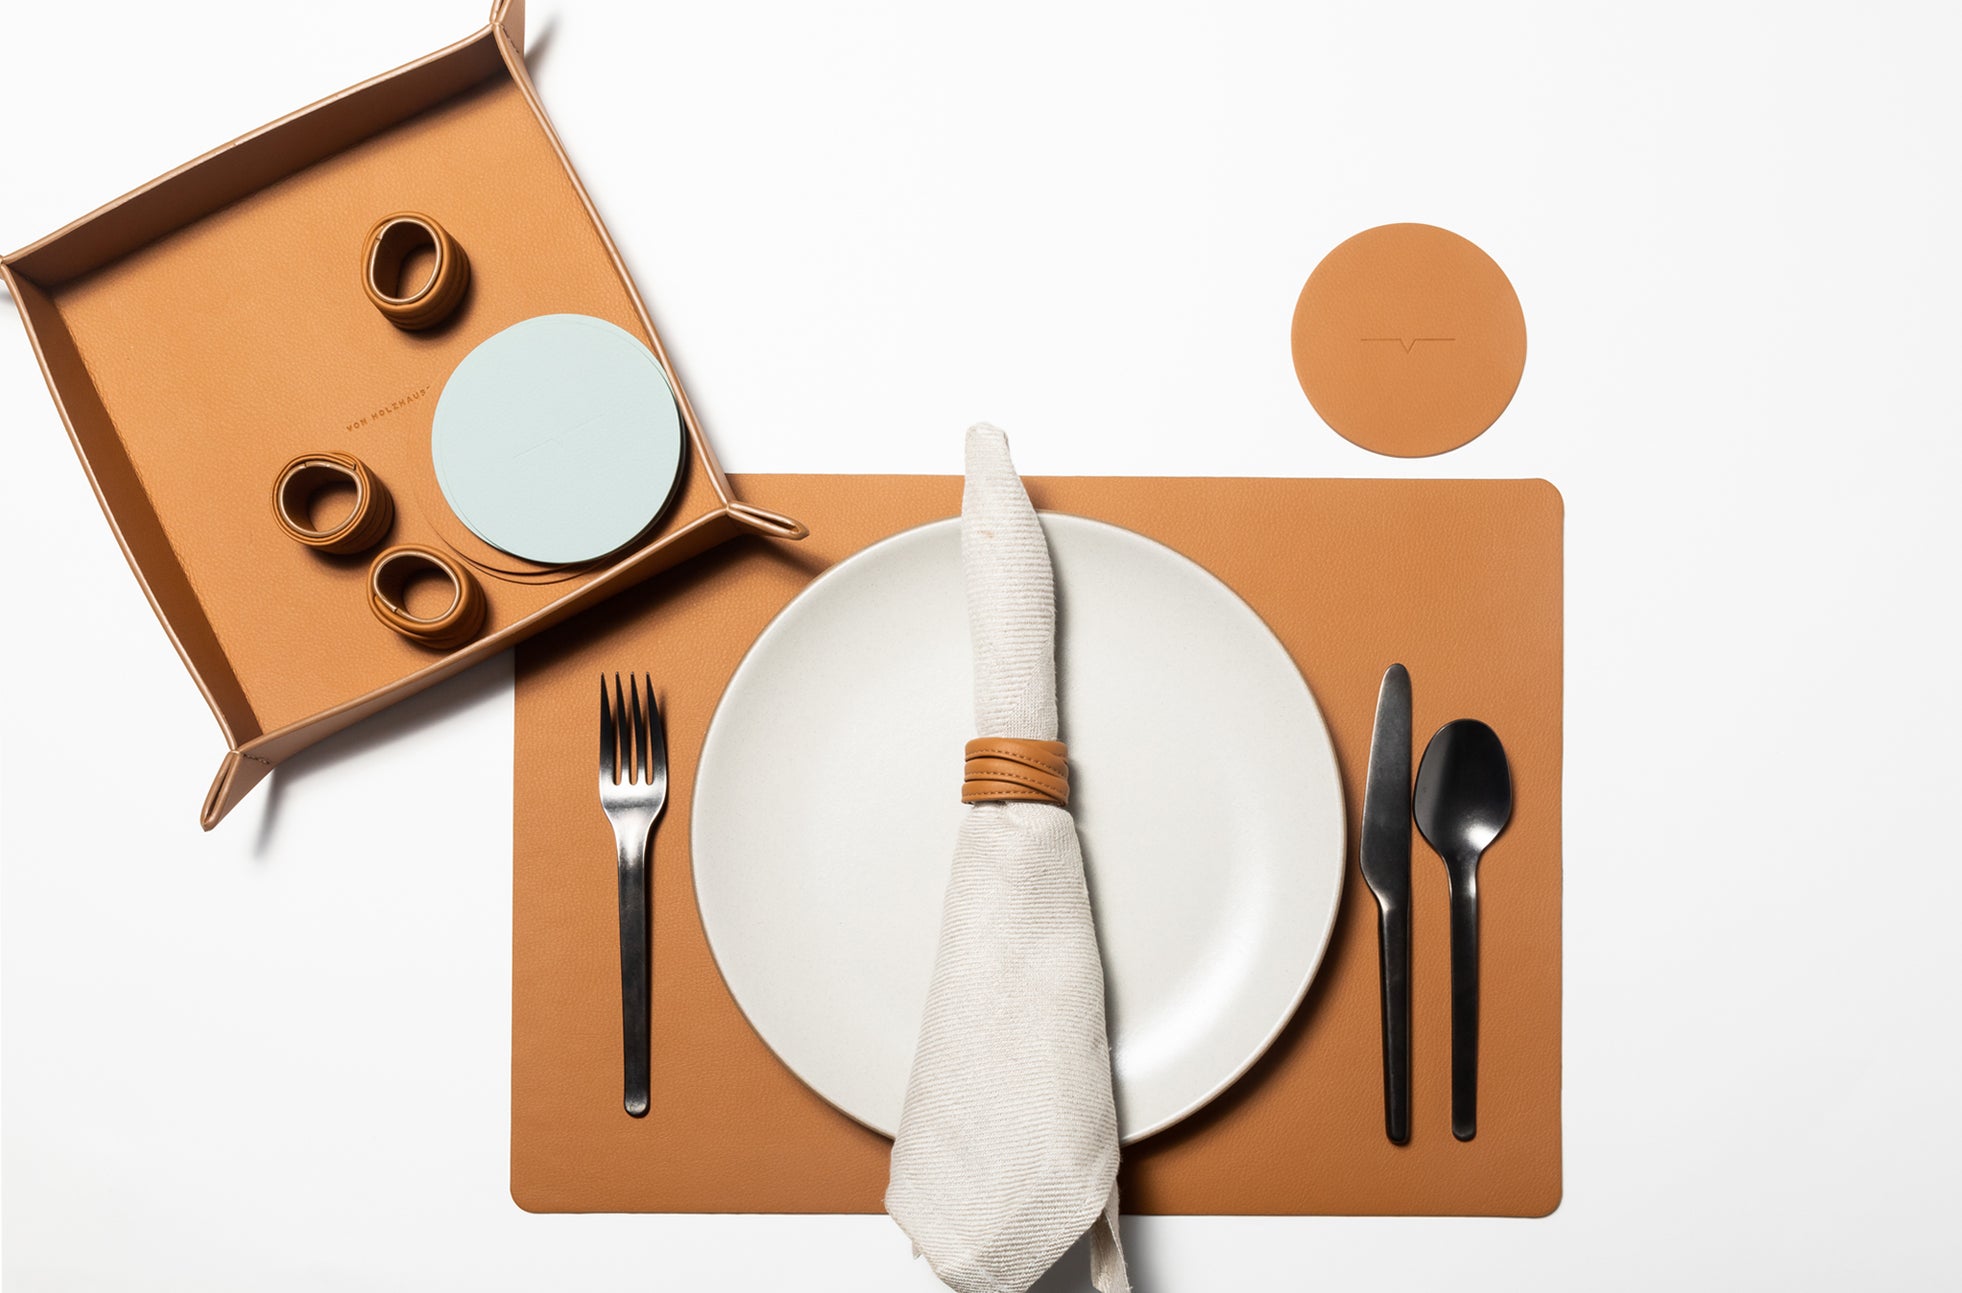 The Placemat Set - Sample Sale in Technik-Leather in Caramel & Sea image 4